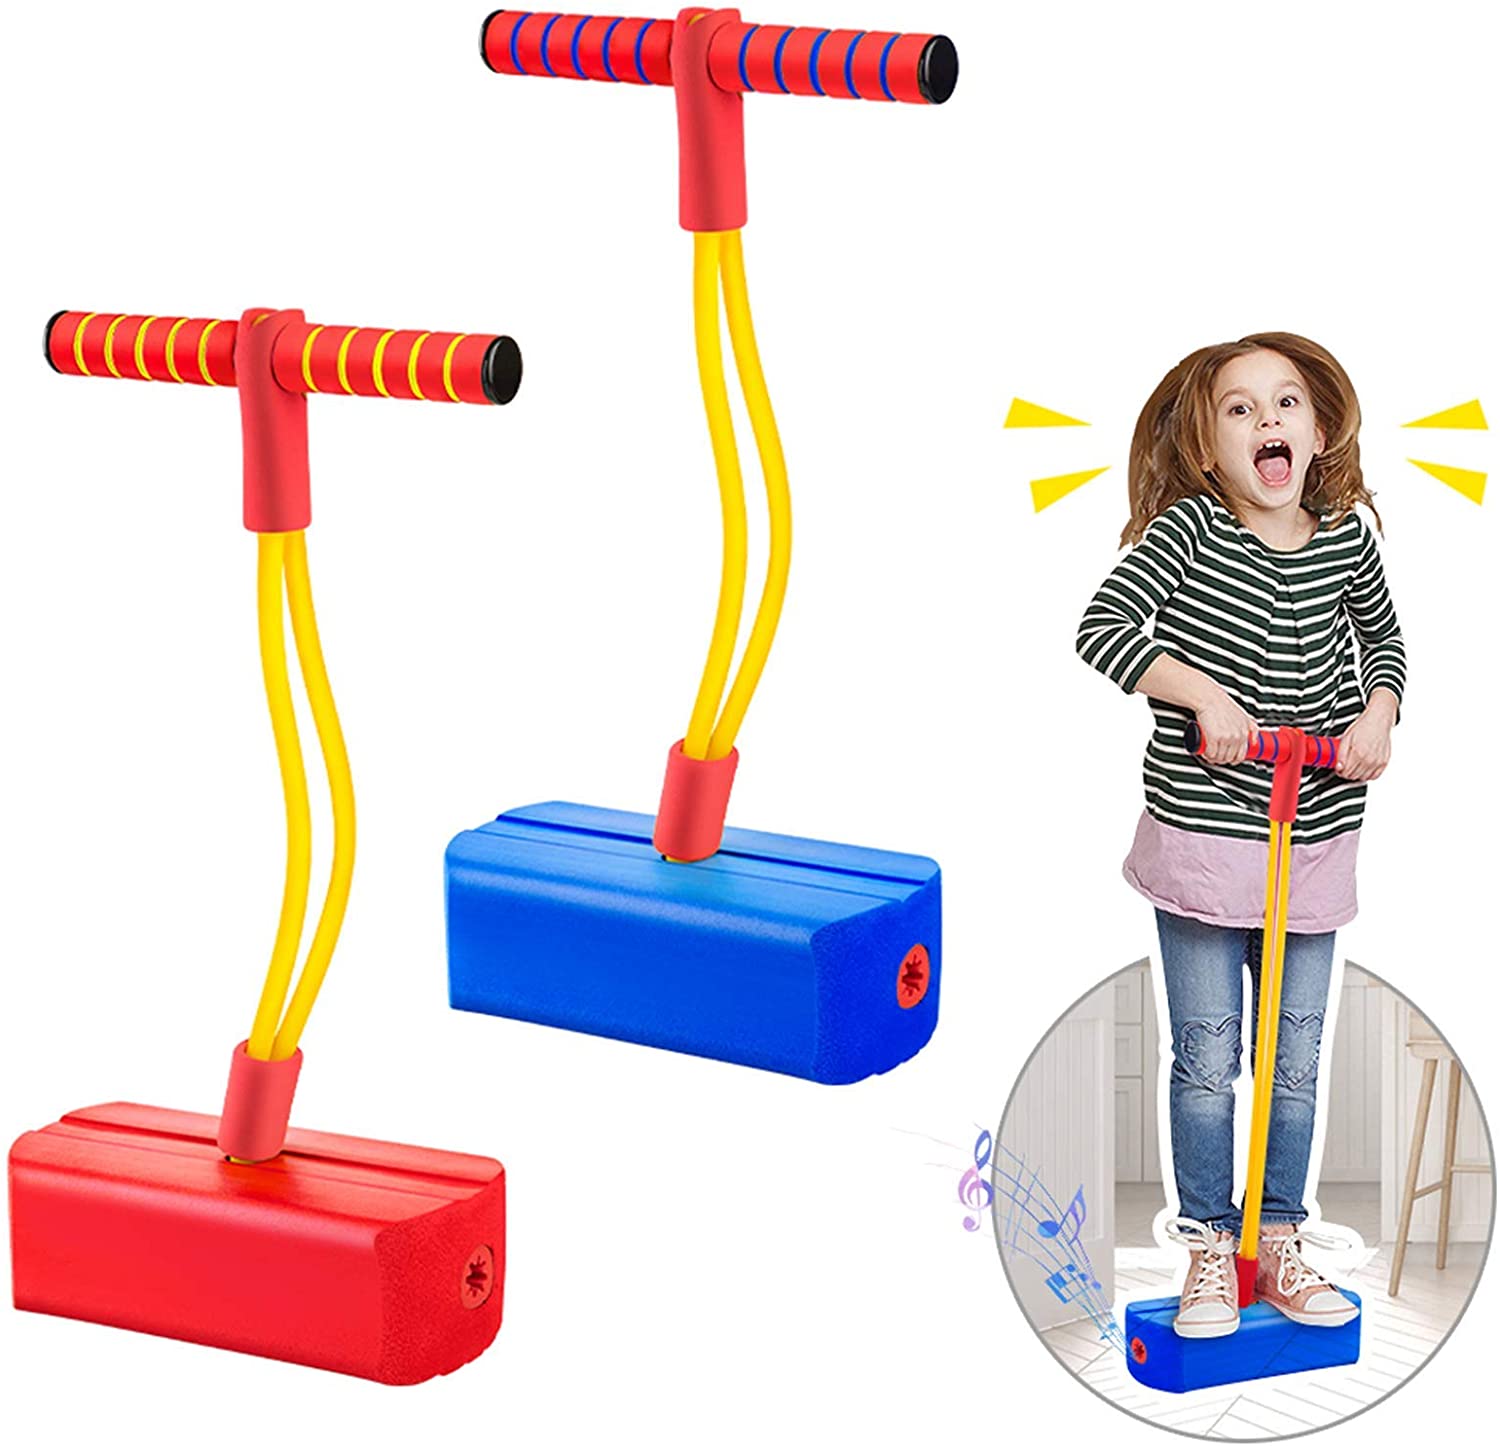 Foam Pogo Jumper for Kids Fun and Safe Pogo Stick for Toddlers, Durable Foam and Bungee Jumper for Ages 3 and up, Supports up to 250lbs